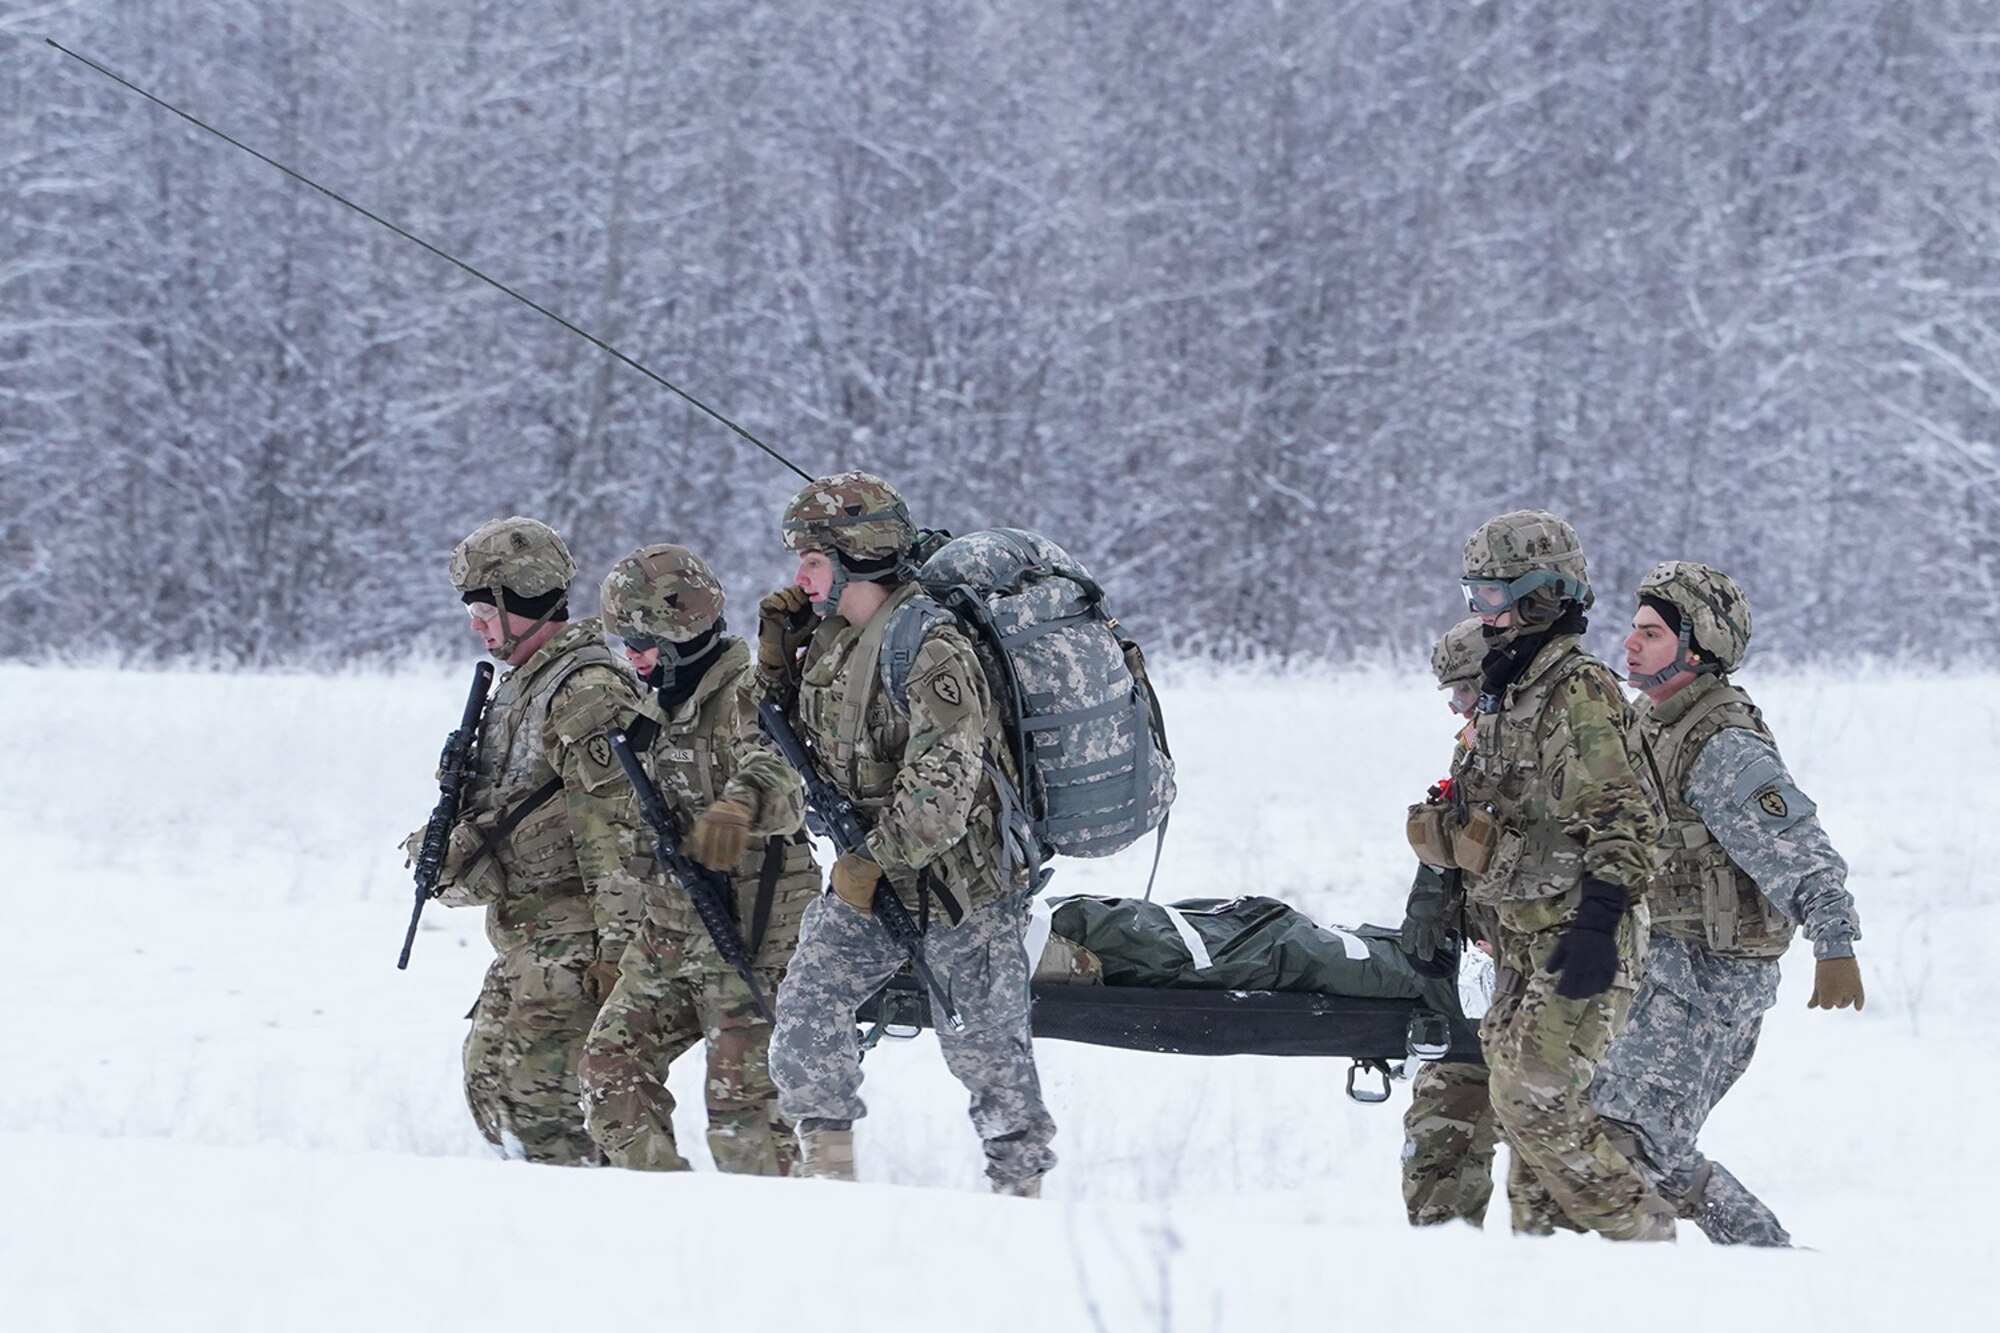 Medics from the 6th Brigade Engineer Battalion (Airborne), 4th Infantry Brigade Combat Team (Airborne), 25th Infantry Division, U.S. Army Alaska, carry a simulated casualty to an extraction point while training with aviators from the Alaska Army National Guard at Neibhur Drop Zone, Nov. 26, 2019, to hone their life-saving and Medevac hoist skills for the paratroopers’ upcoming rotation to the Joint Readiness Training Center at Fort Polk, La.